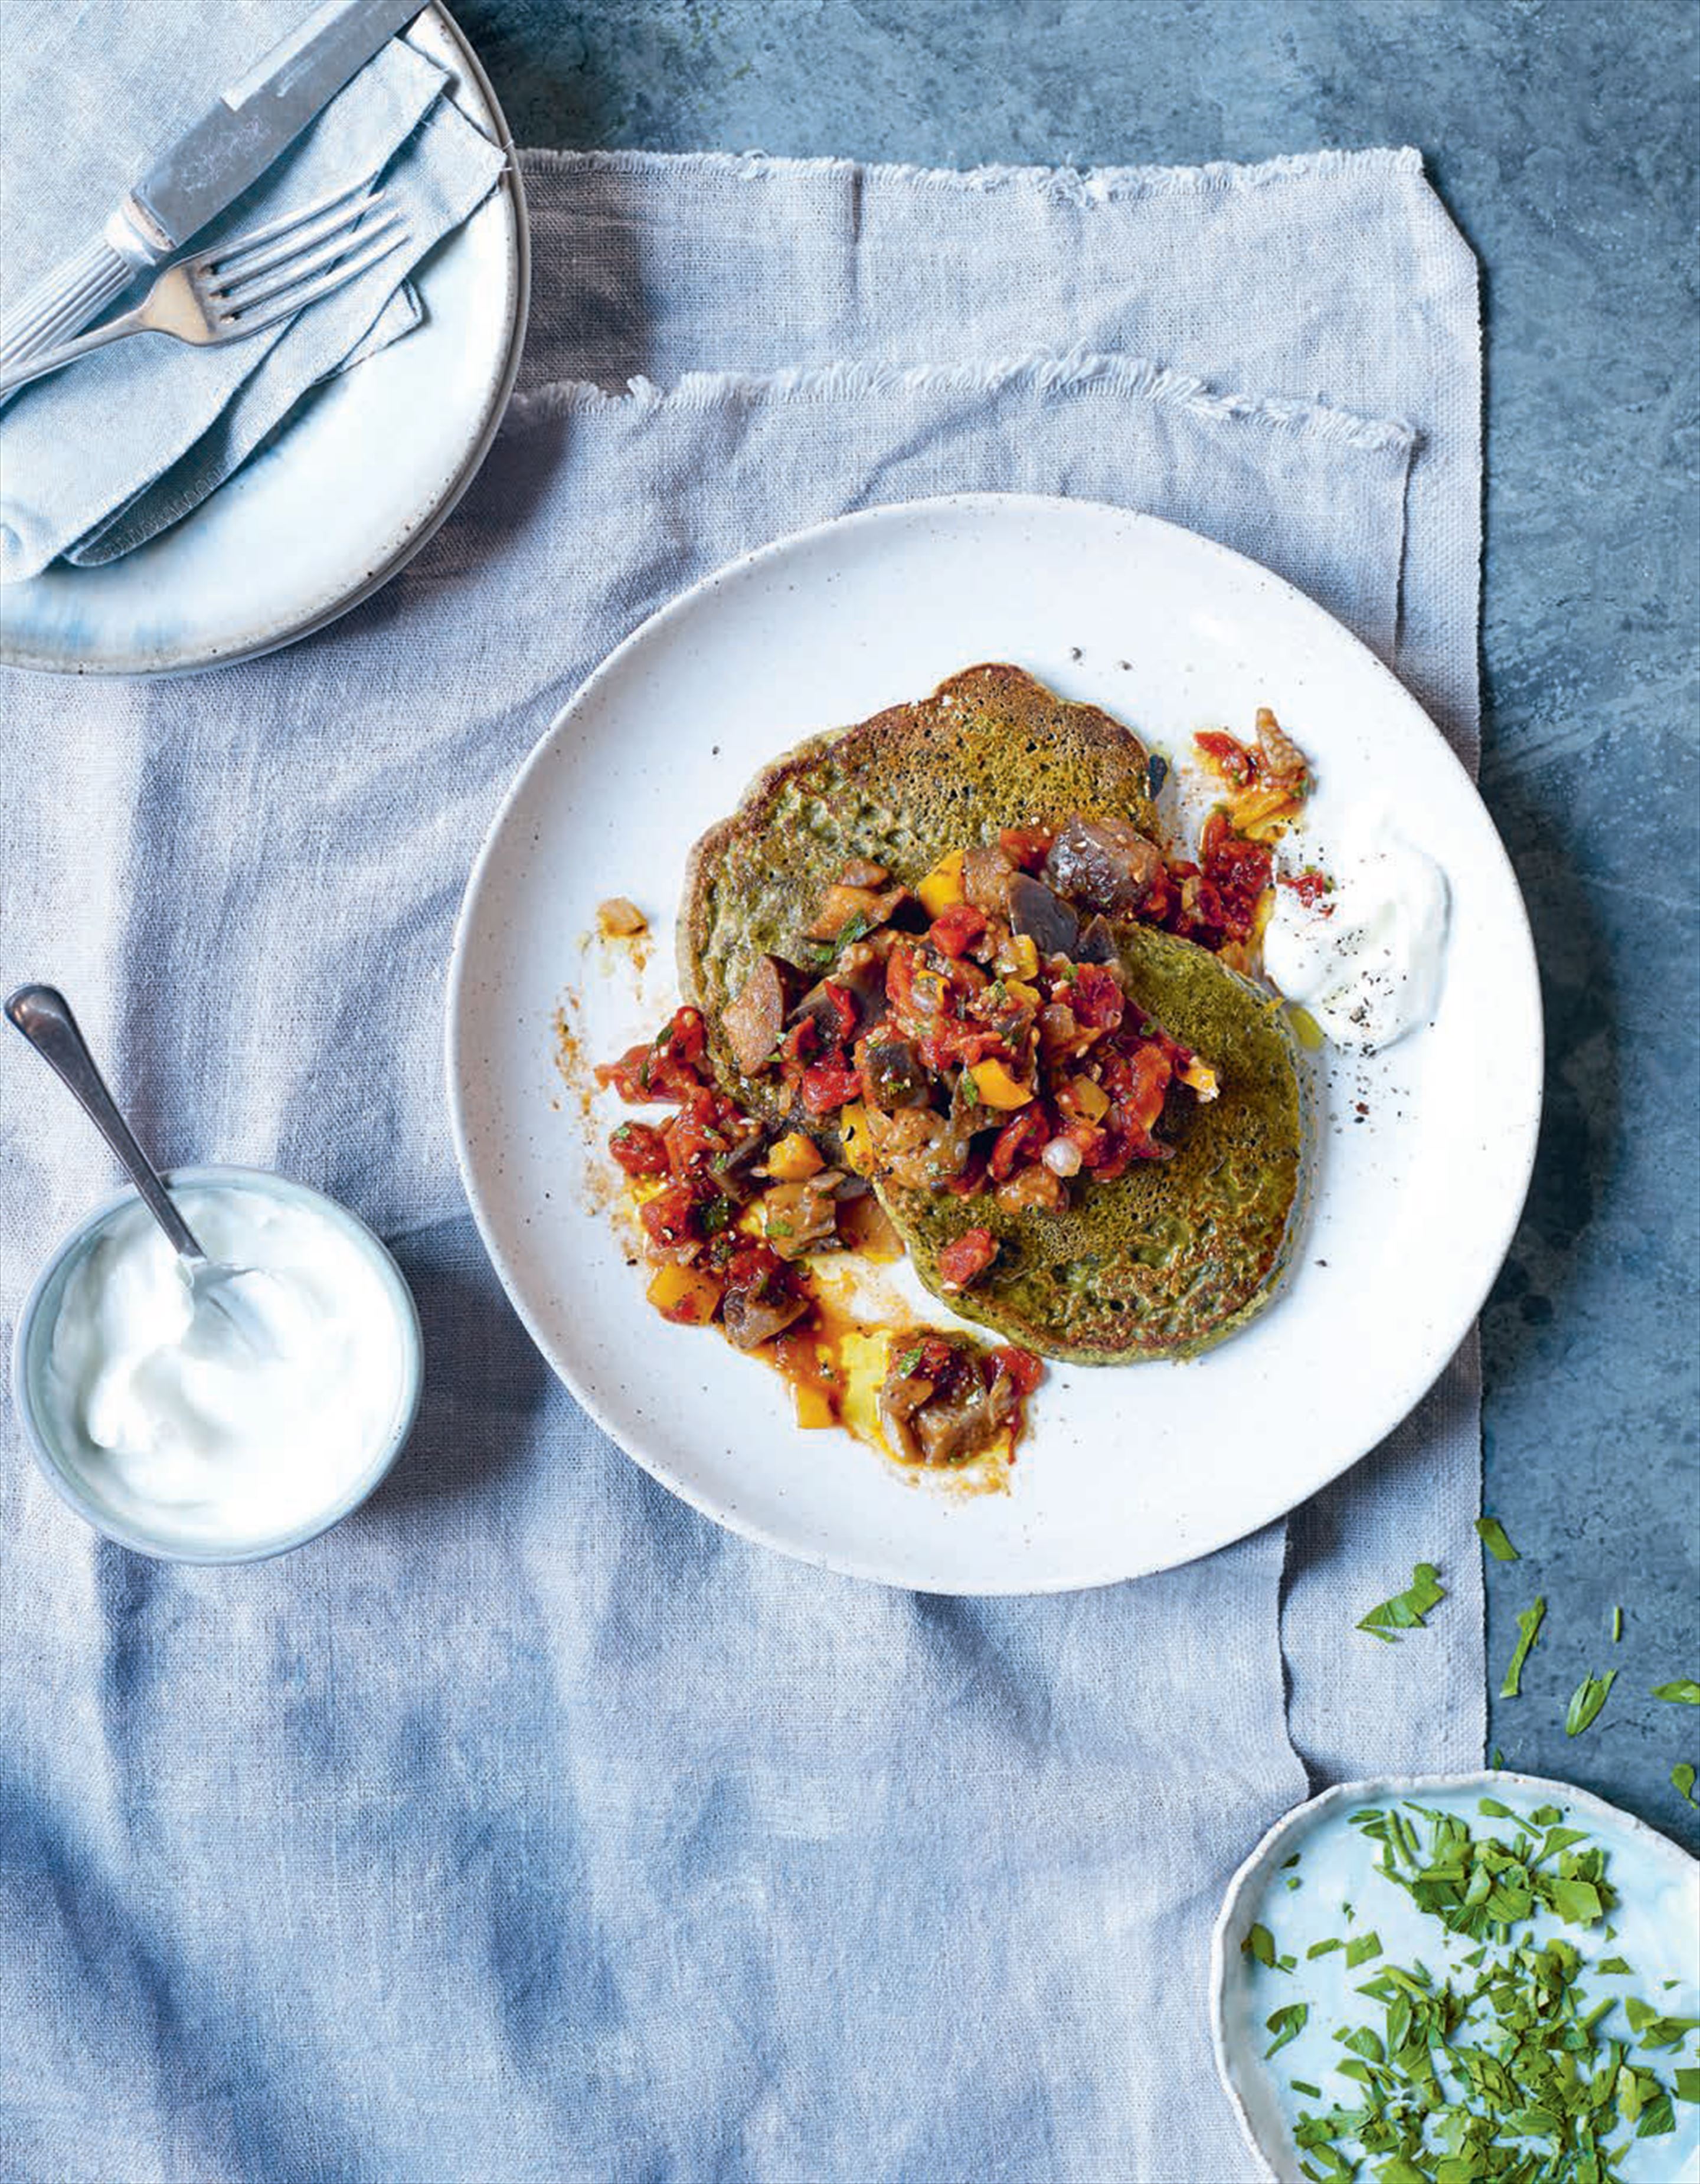 Chickpea and chard pancakes with aubergine stew